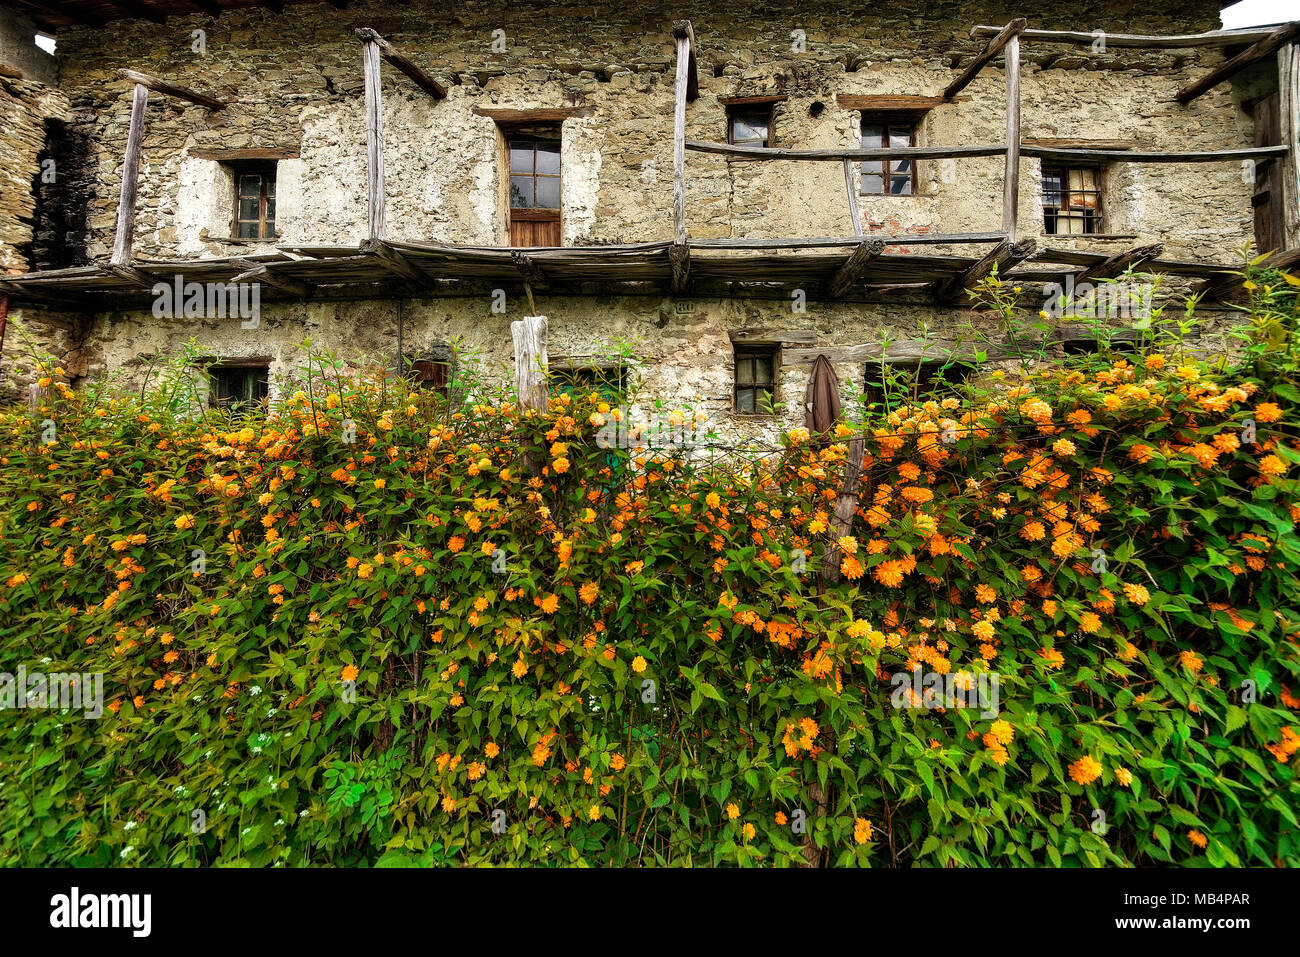 Depopulation of the mountain. Old abandoned mountain house in Mindino, municipality of Garessio, in Piedmont, Italy. ... but the flowers still bloom. Stock Photo